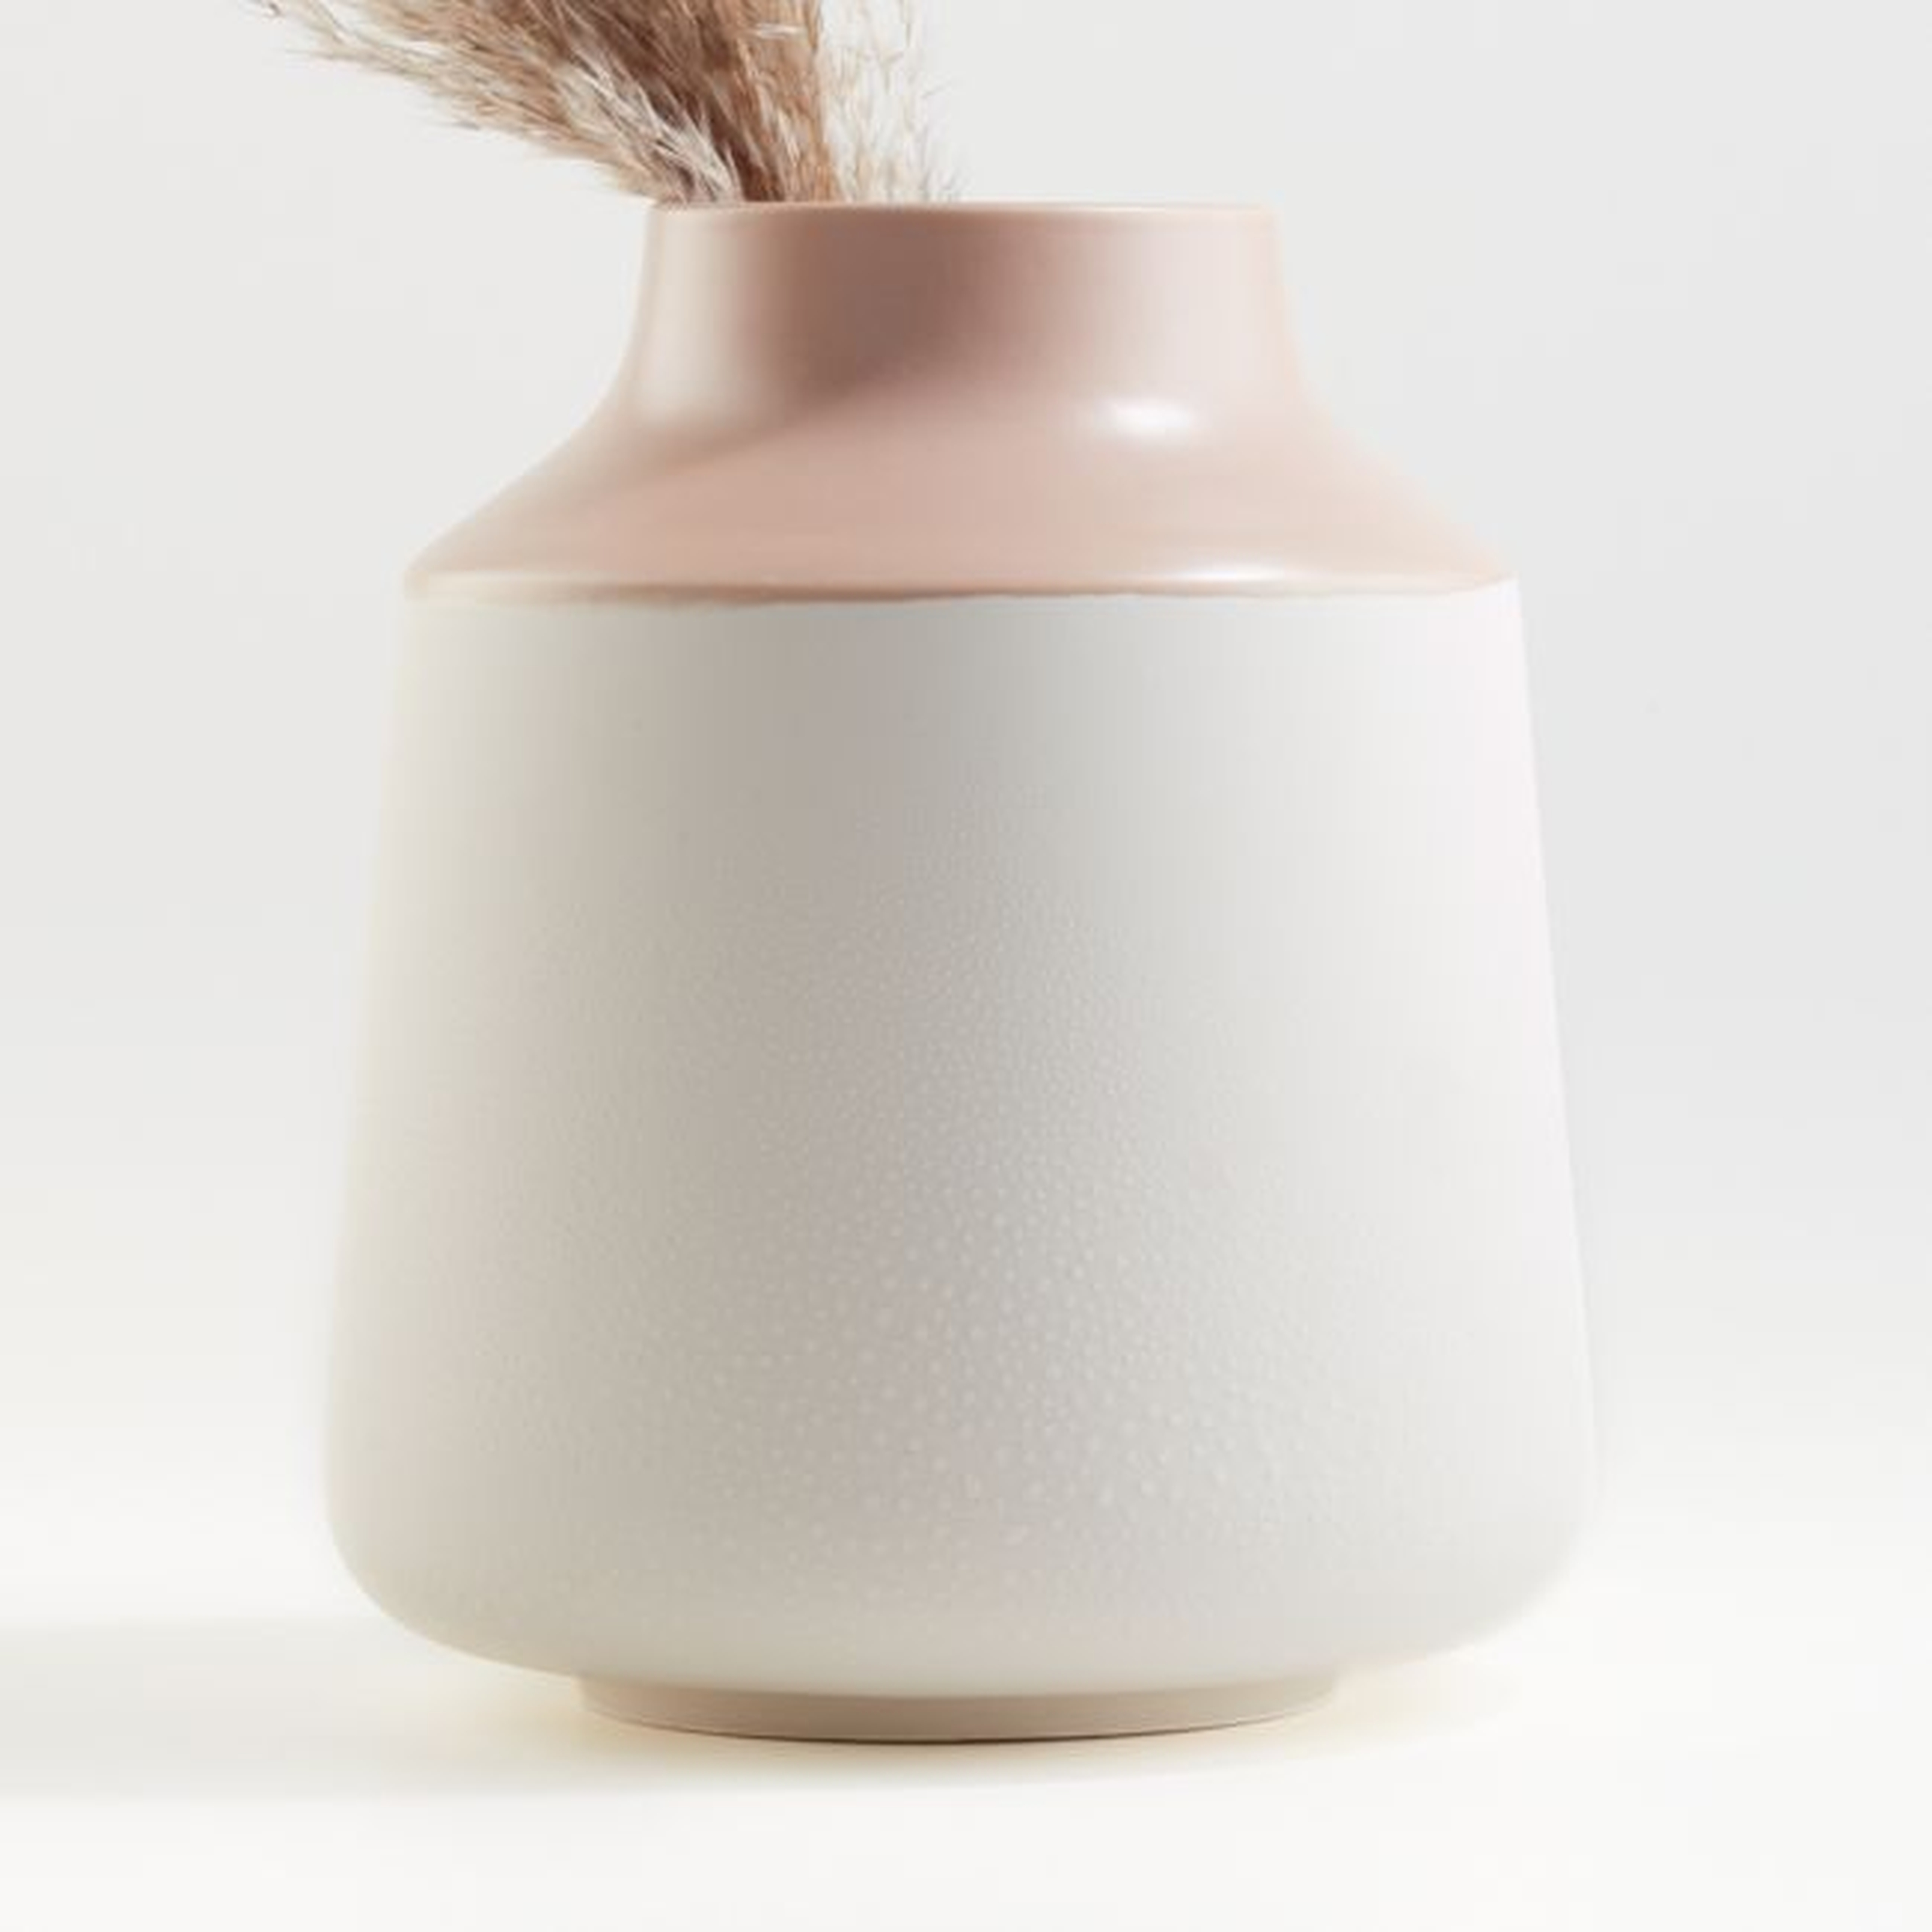 Allondra Rose and White Ceramic Vase - Crate and Barrel